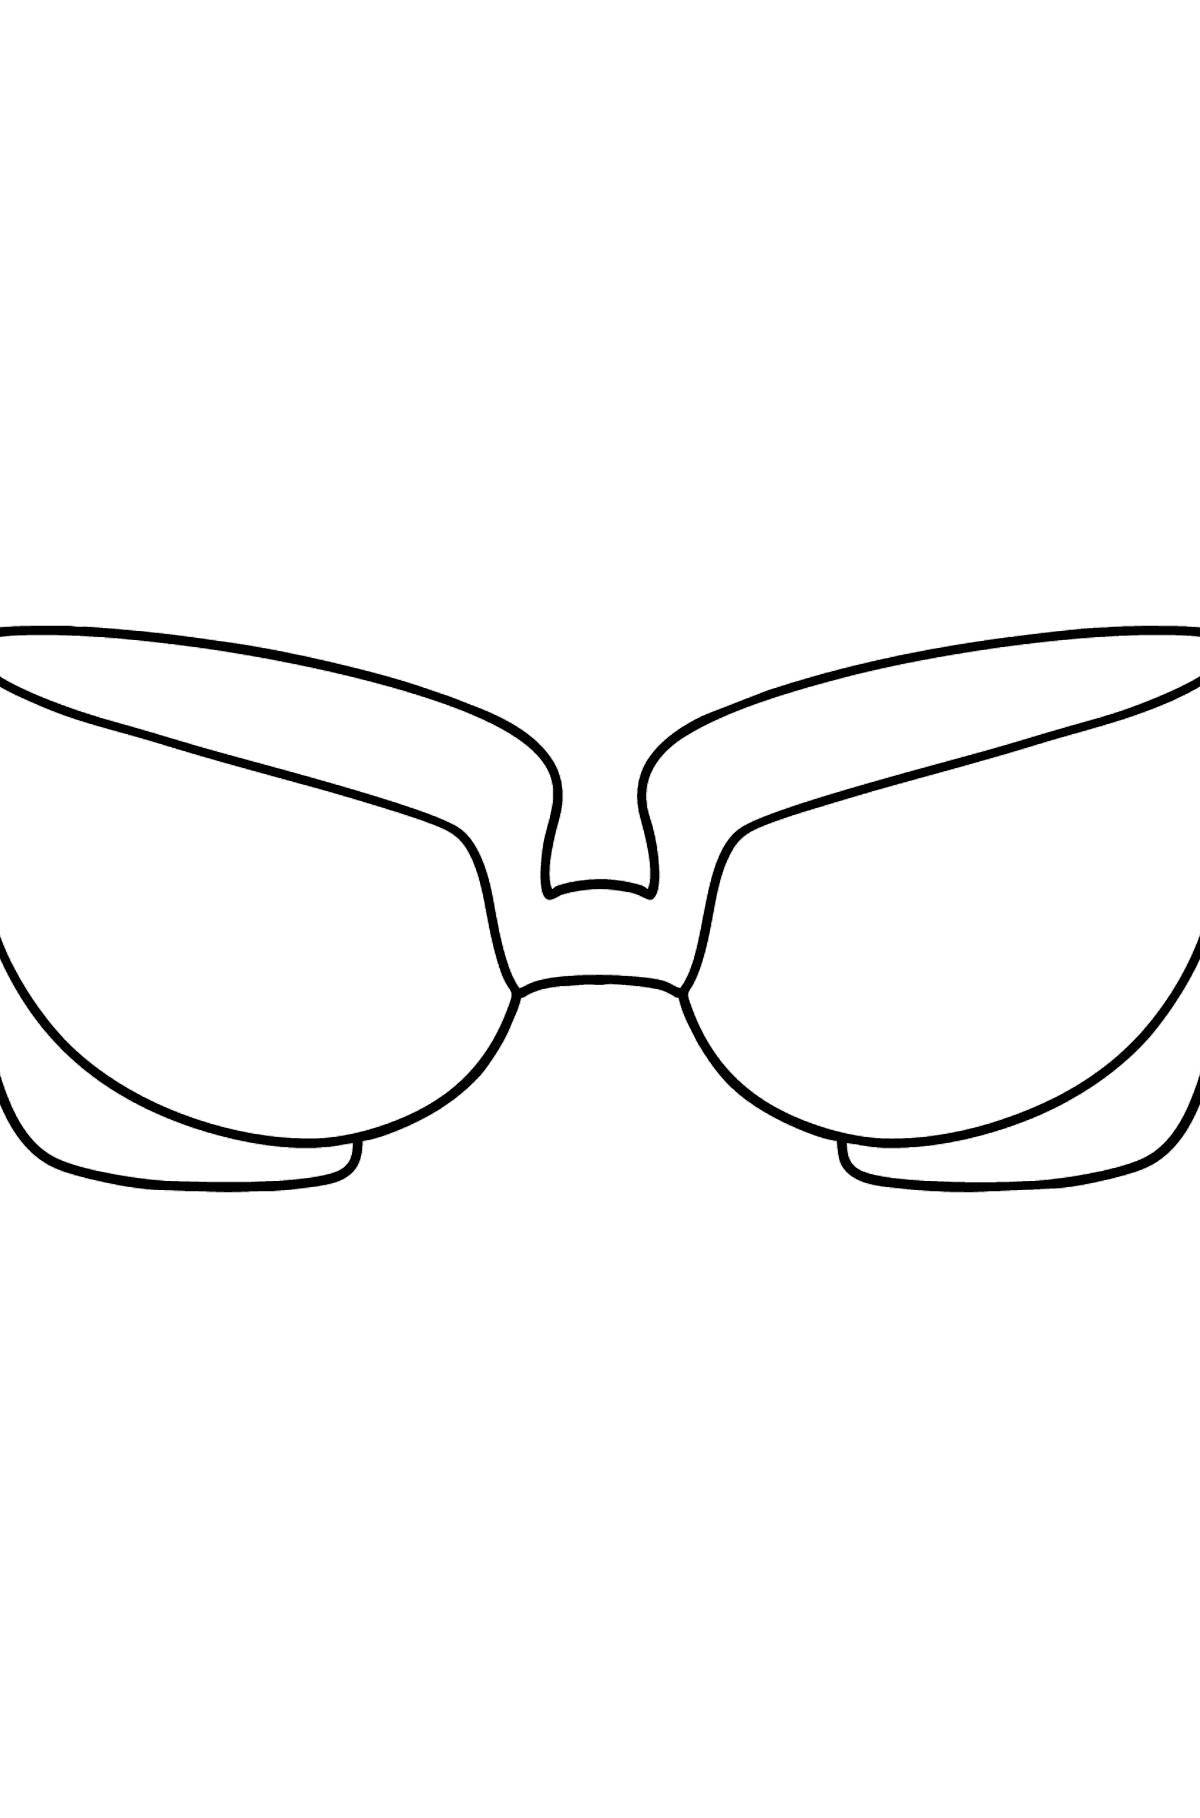 Bright glasses for coloring